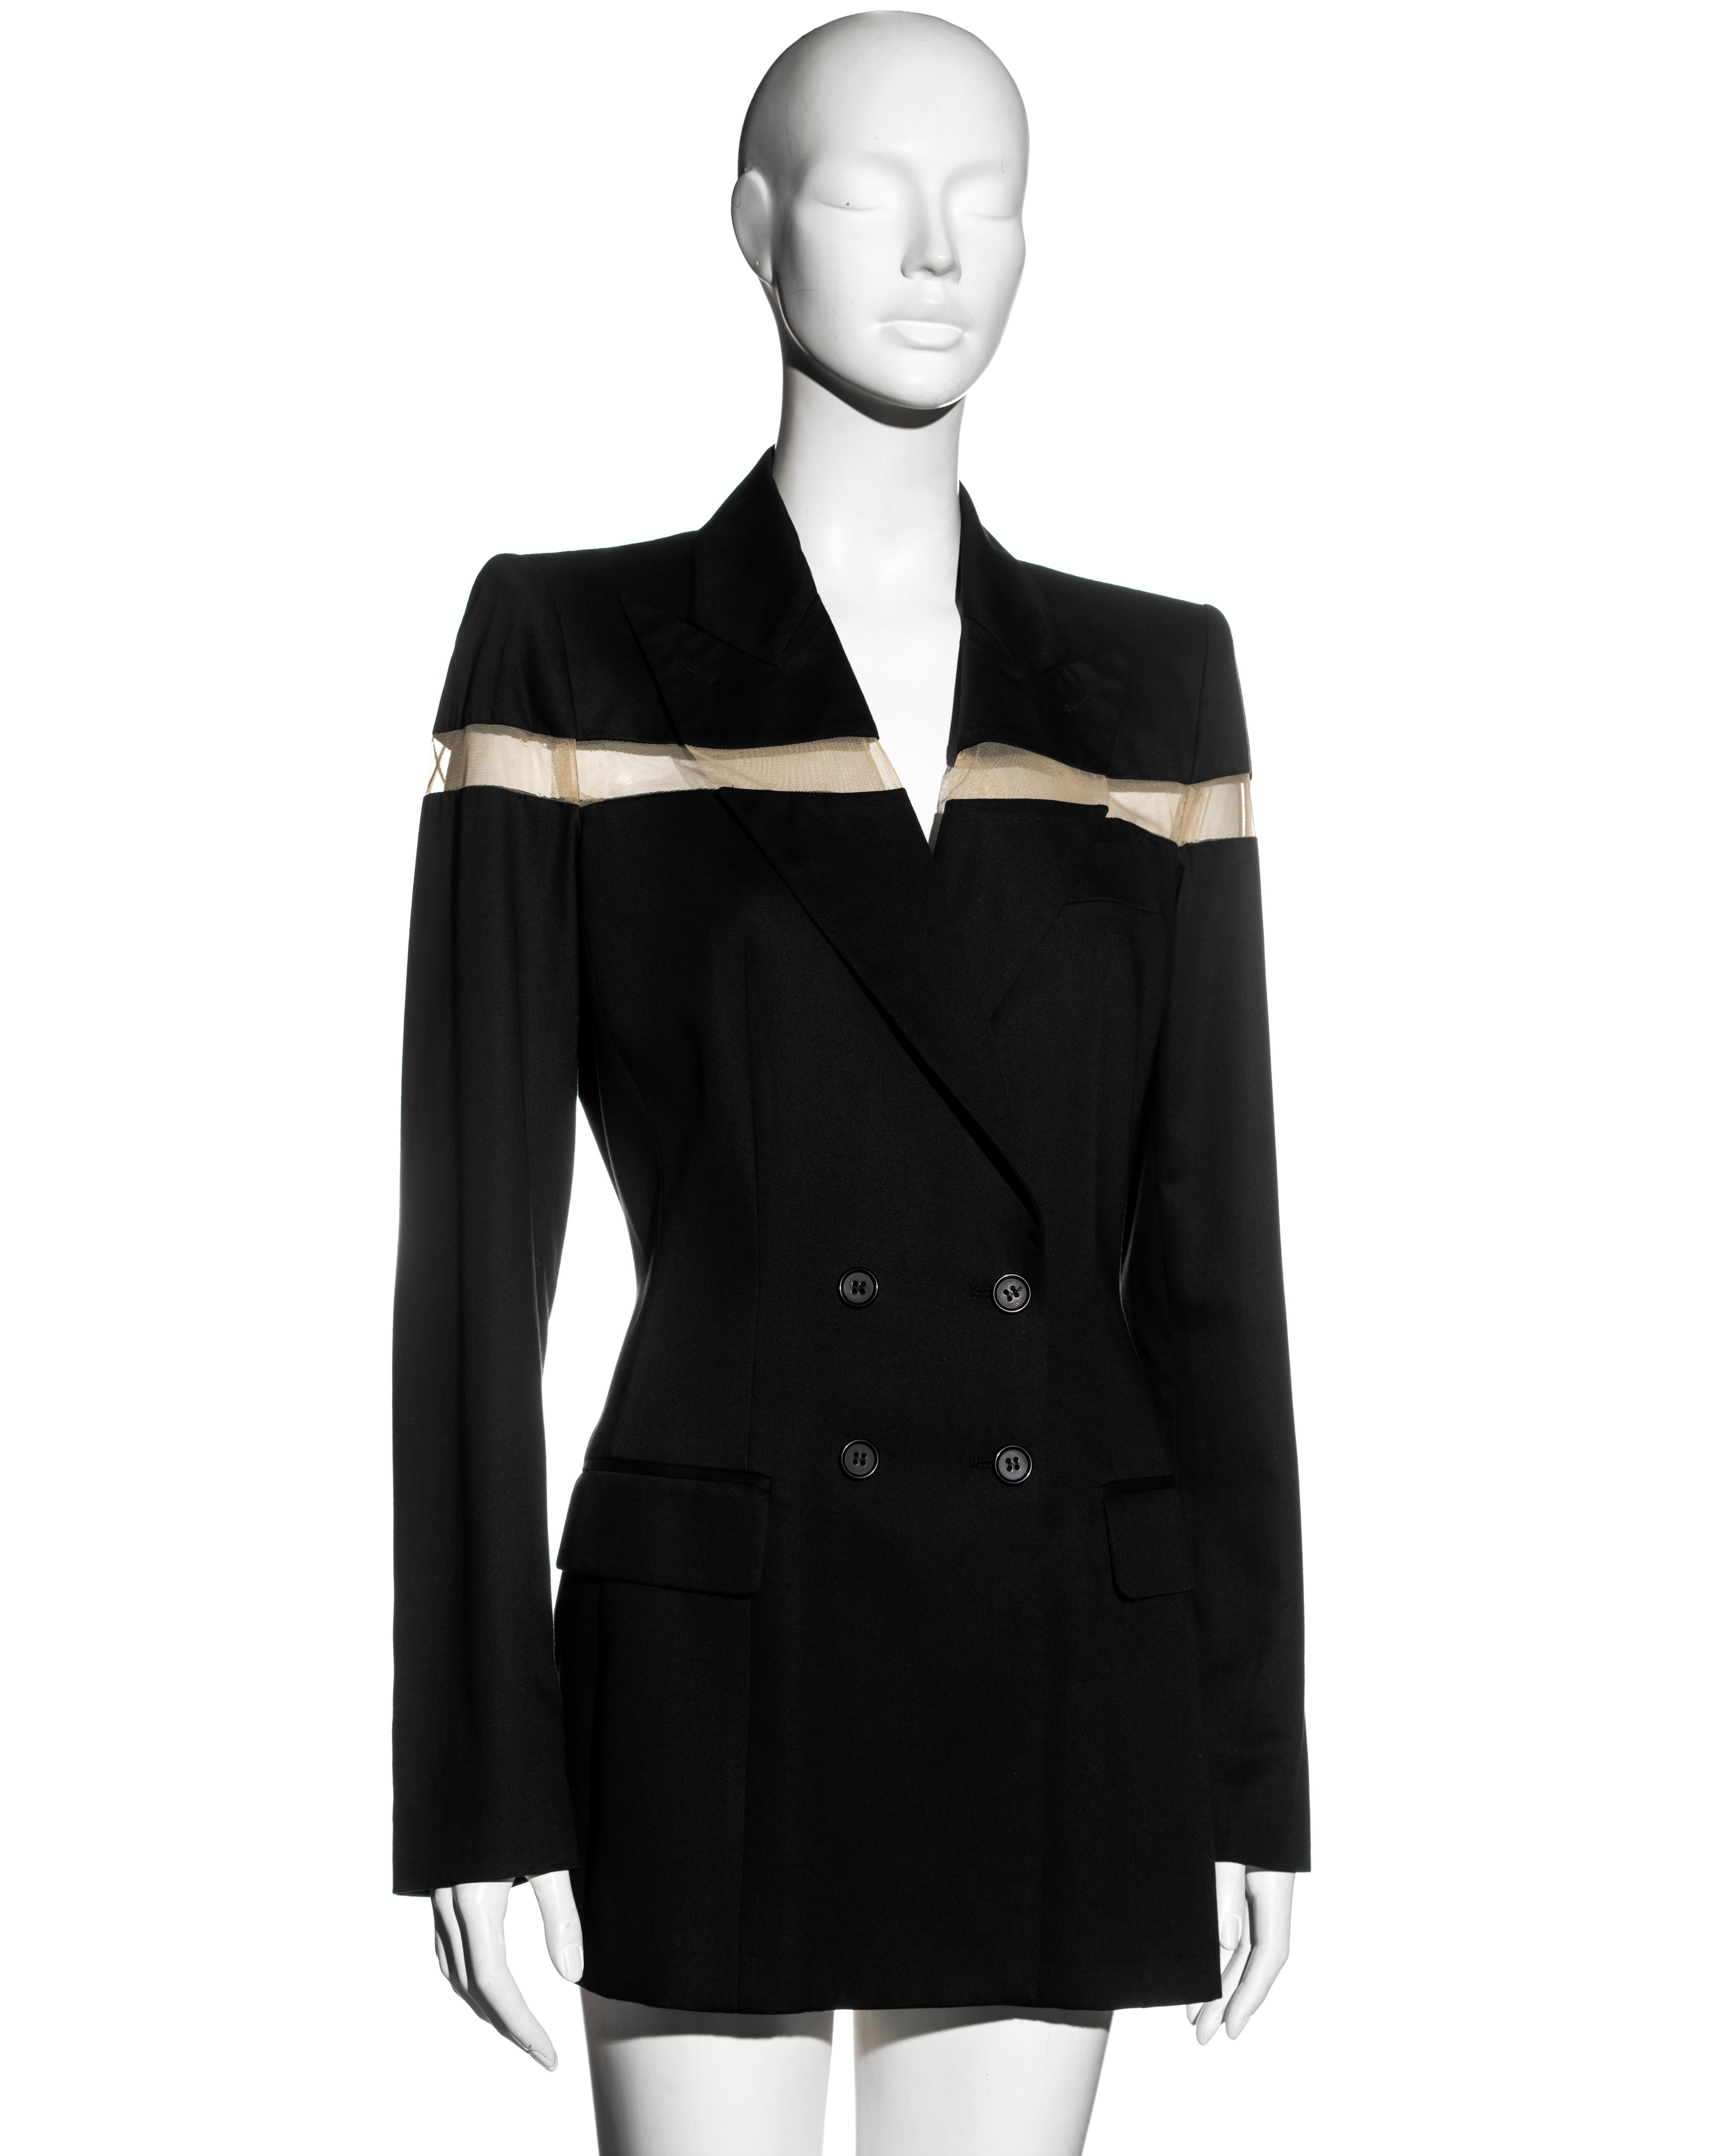 Alexander McQueen black double-breasted blazer mini dress with cut-out, ss 1998 In New Condition For Sale In London, GB